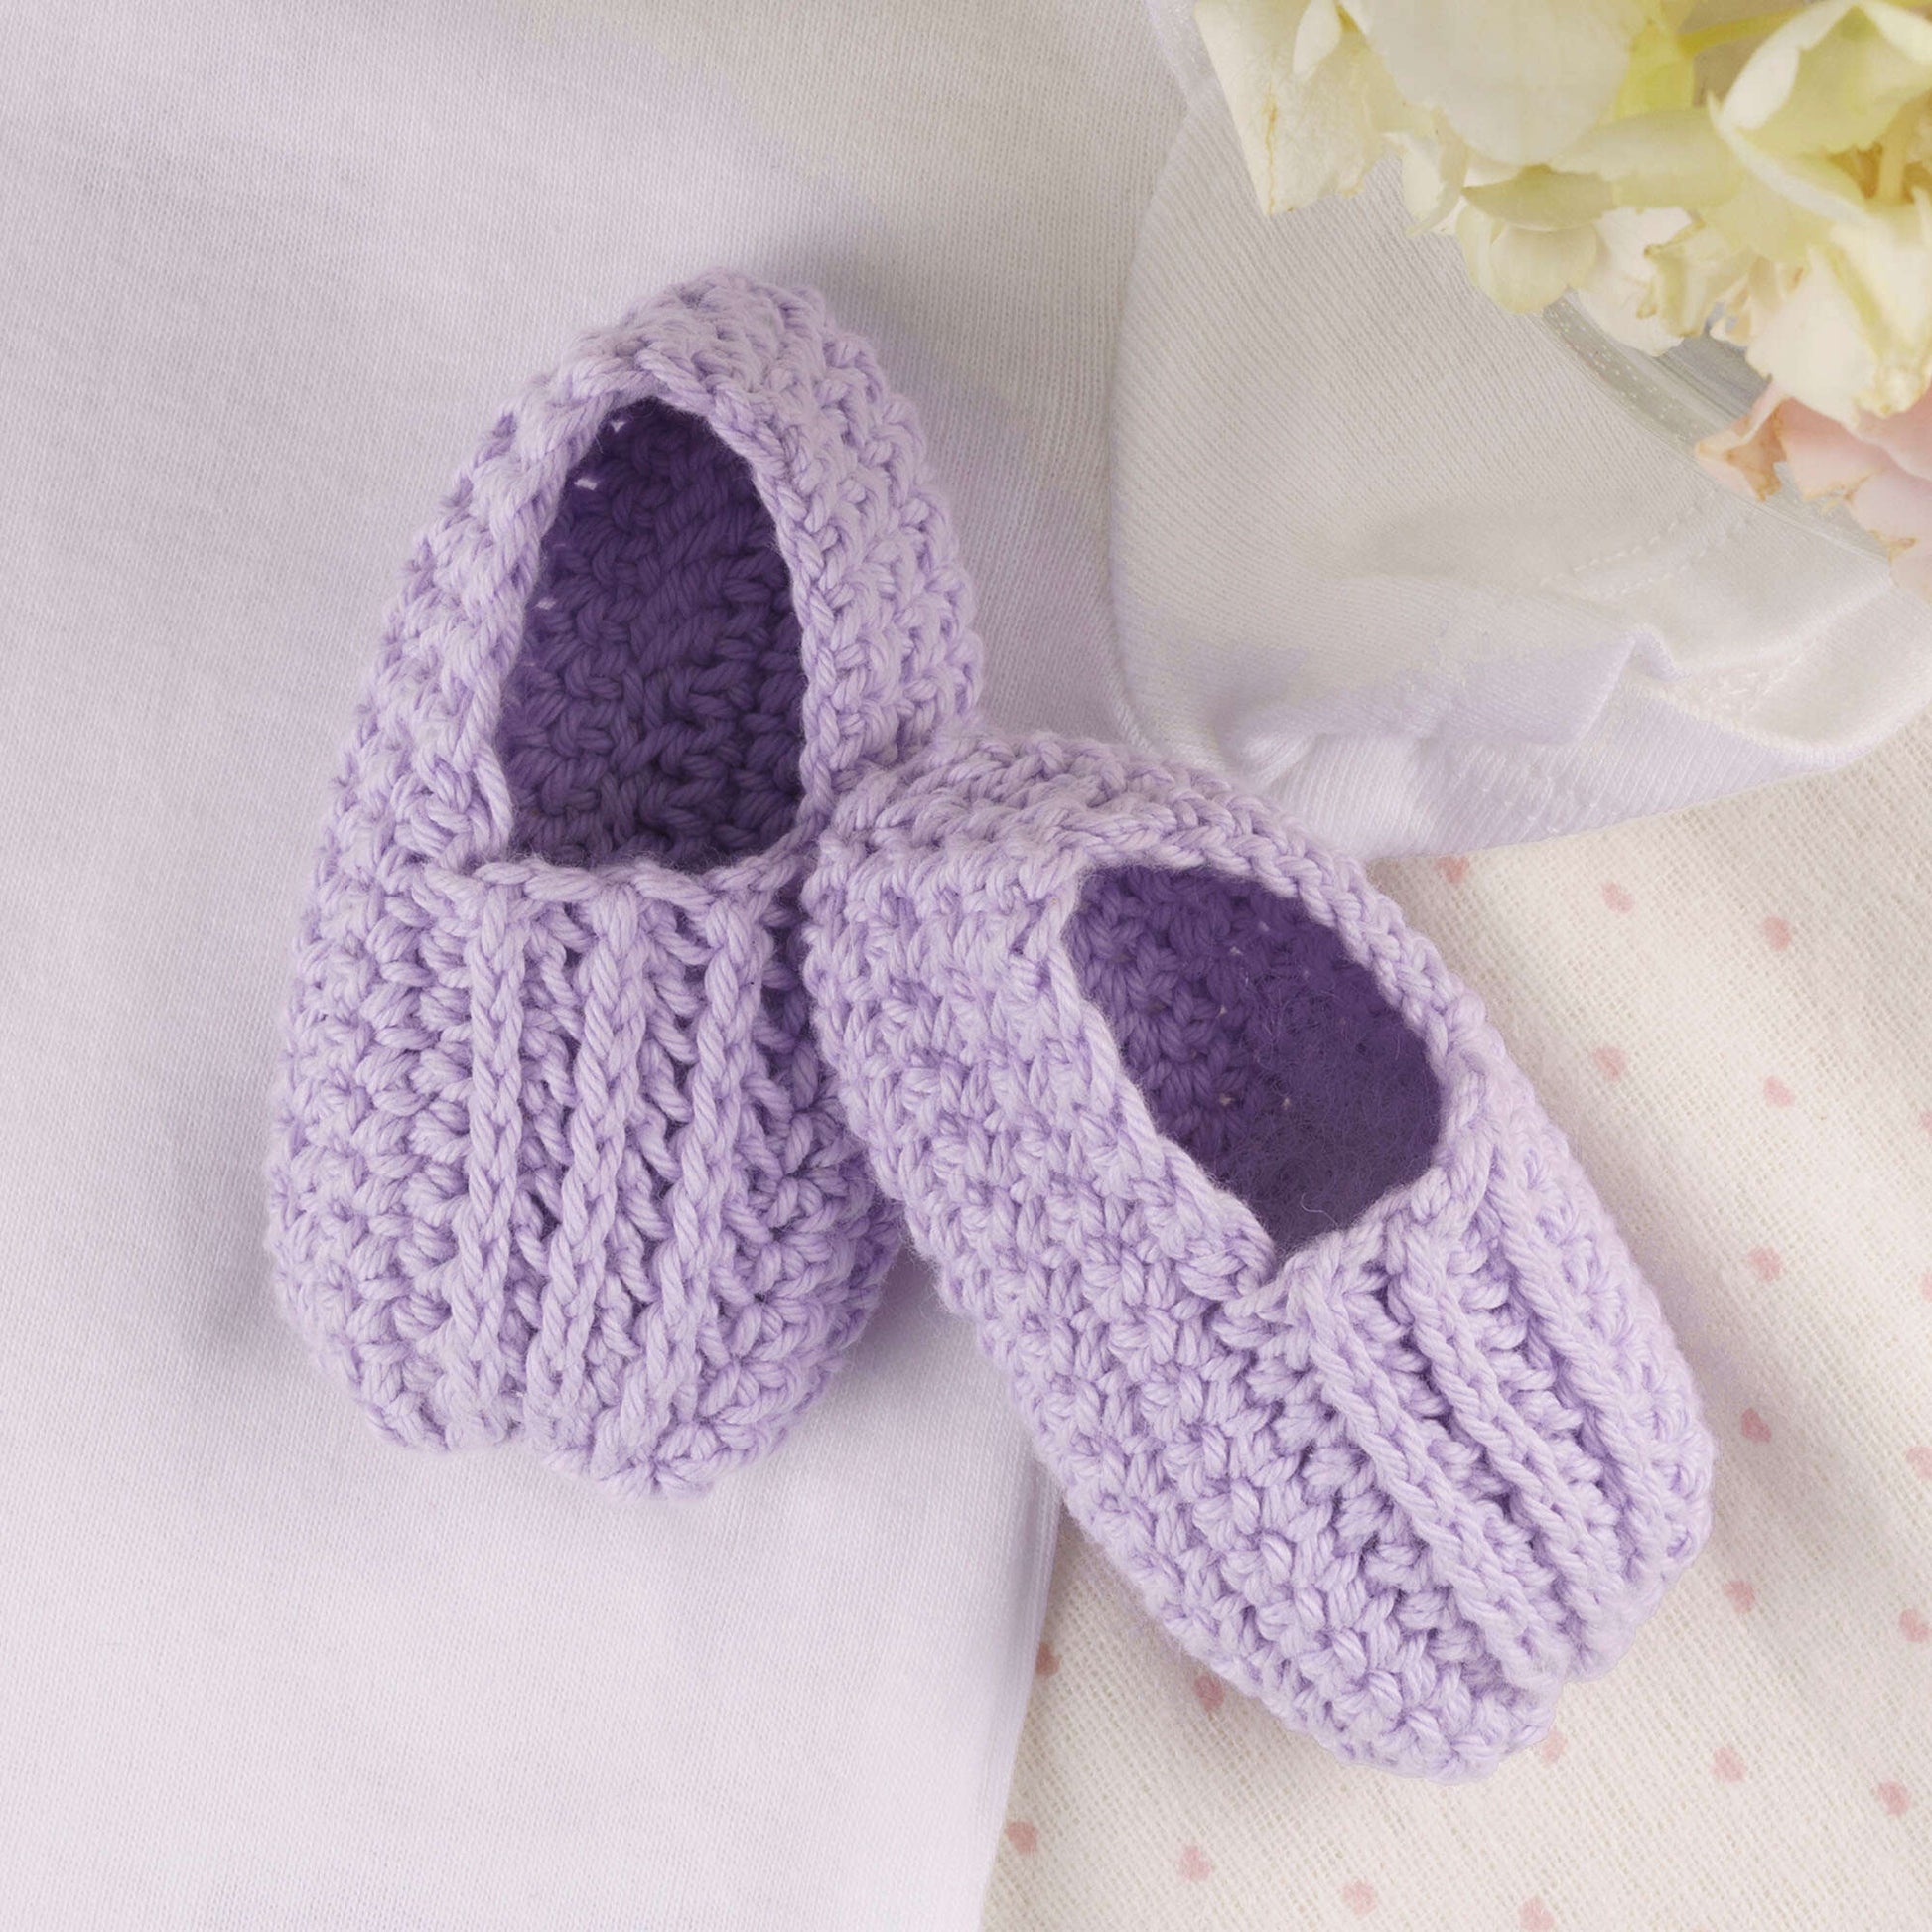 Free Aunt Lydia's Flat Booties with Inset Crochet Pattern